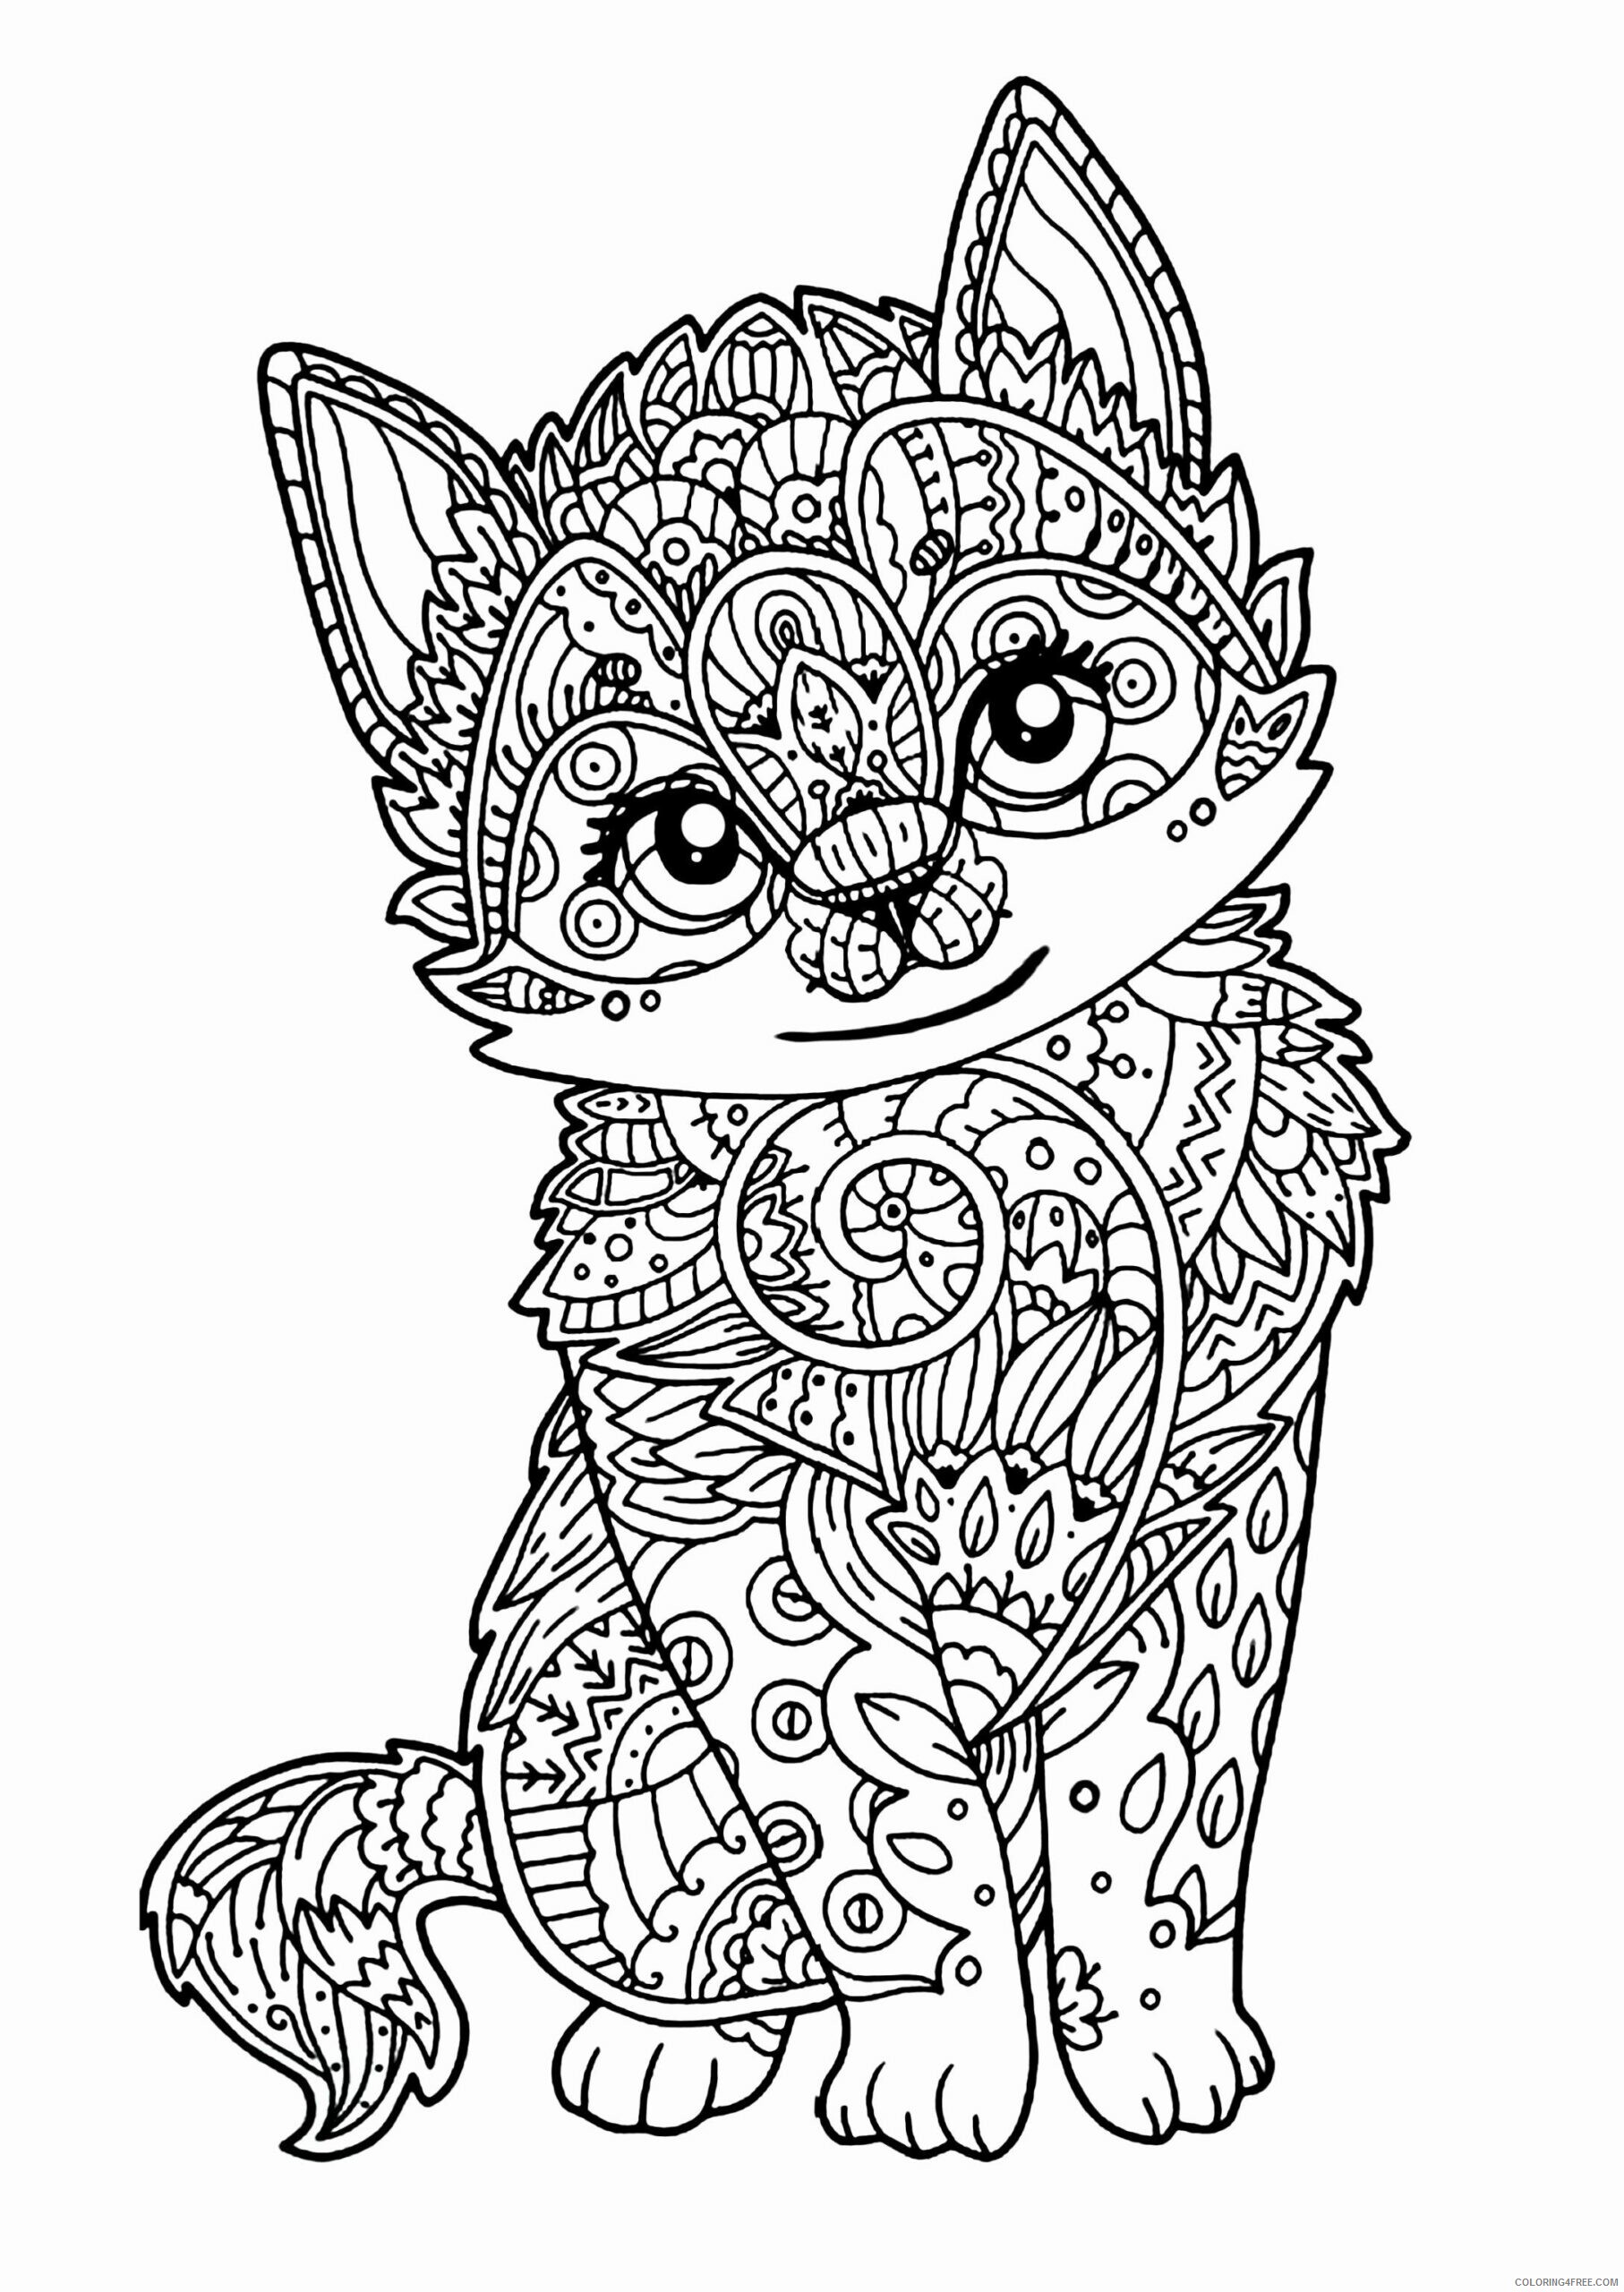 Adult Animal Coloring Pages Printable Sheets amazing cat jpg 2021 a 1734 Coloring4free